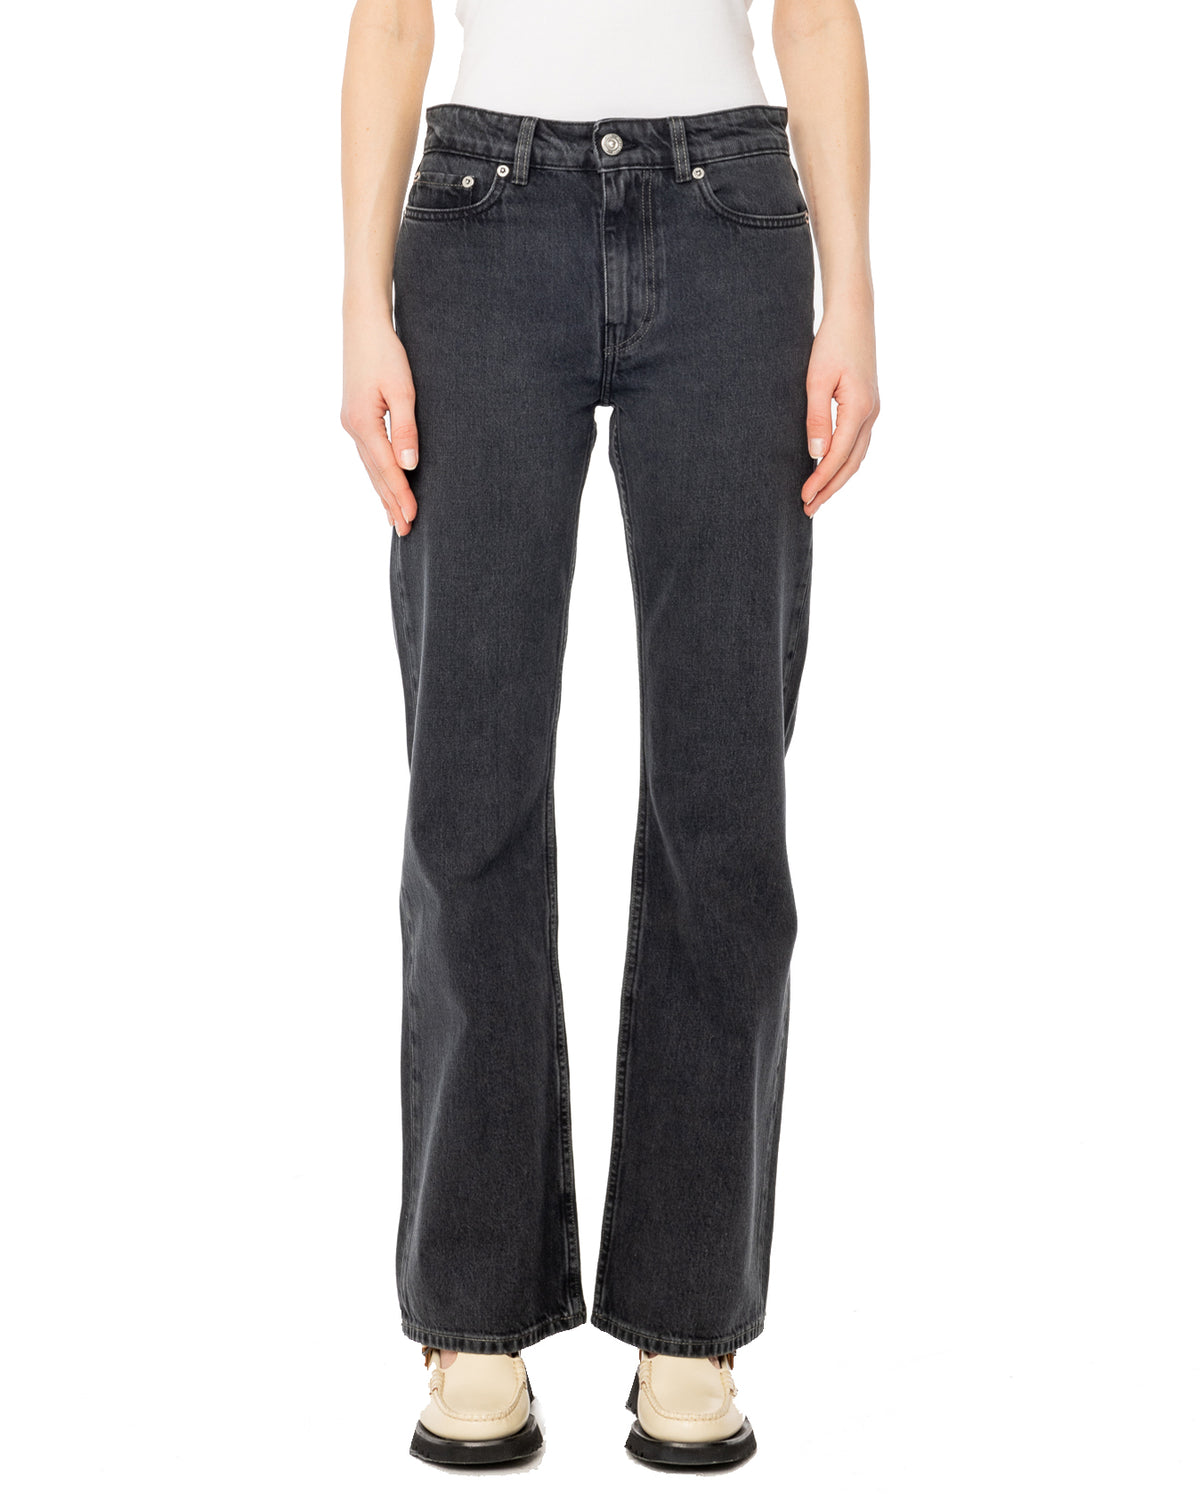 Boot Cut Jeans - Washed Black